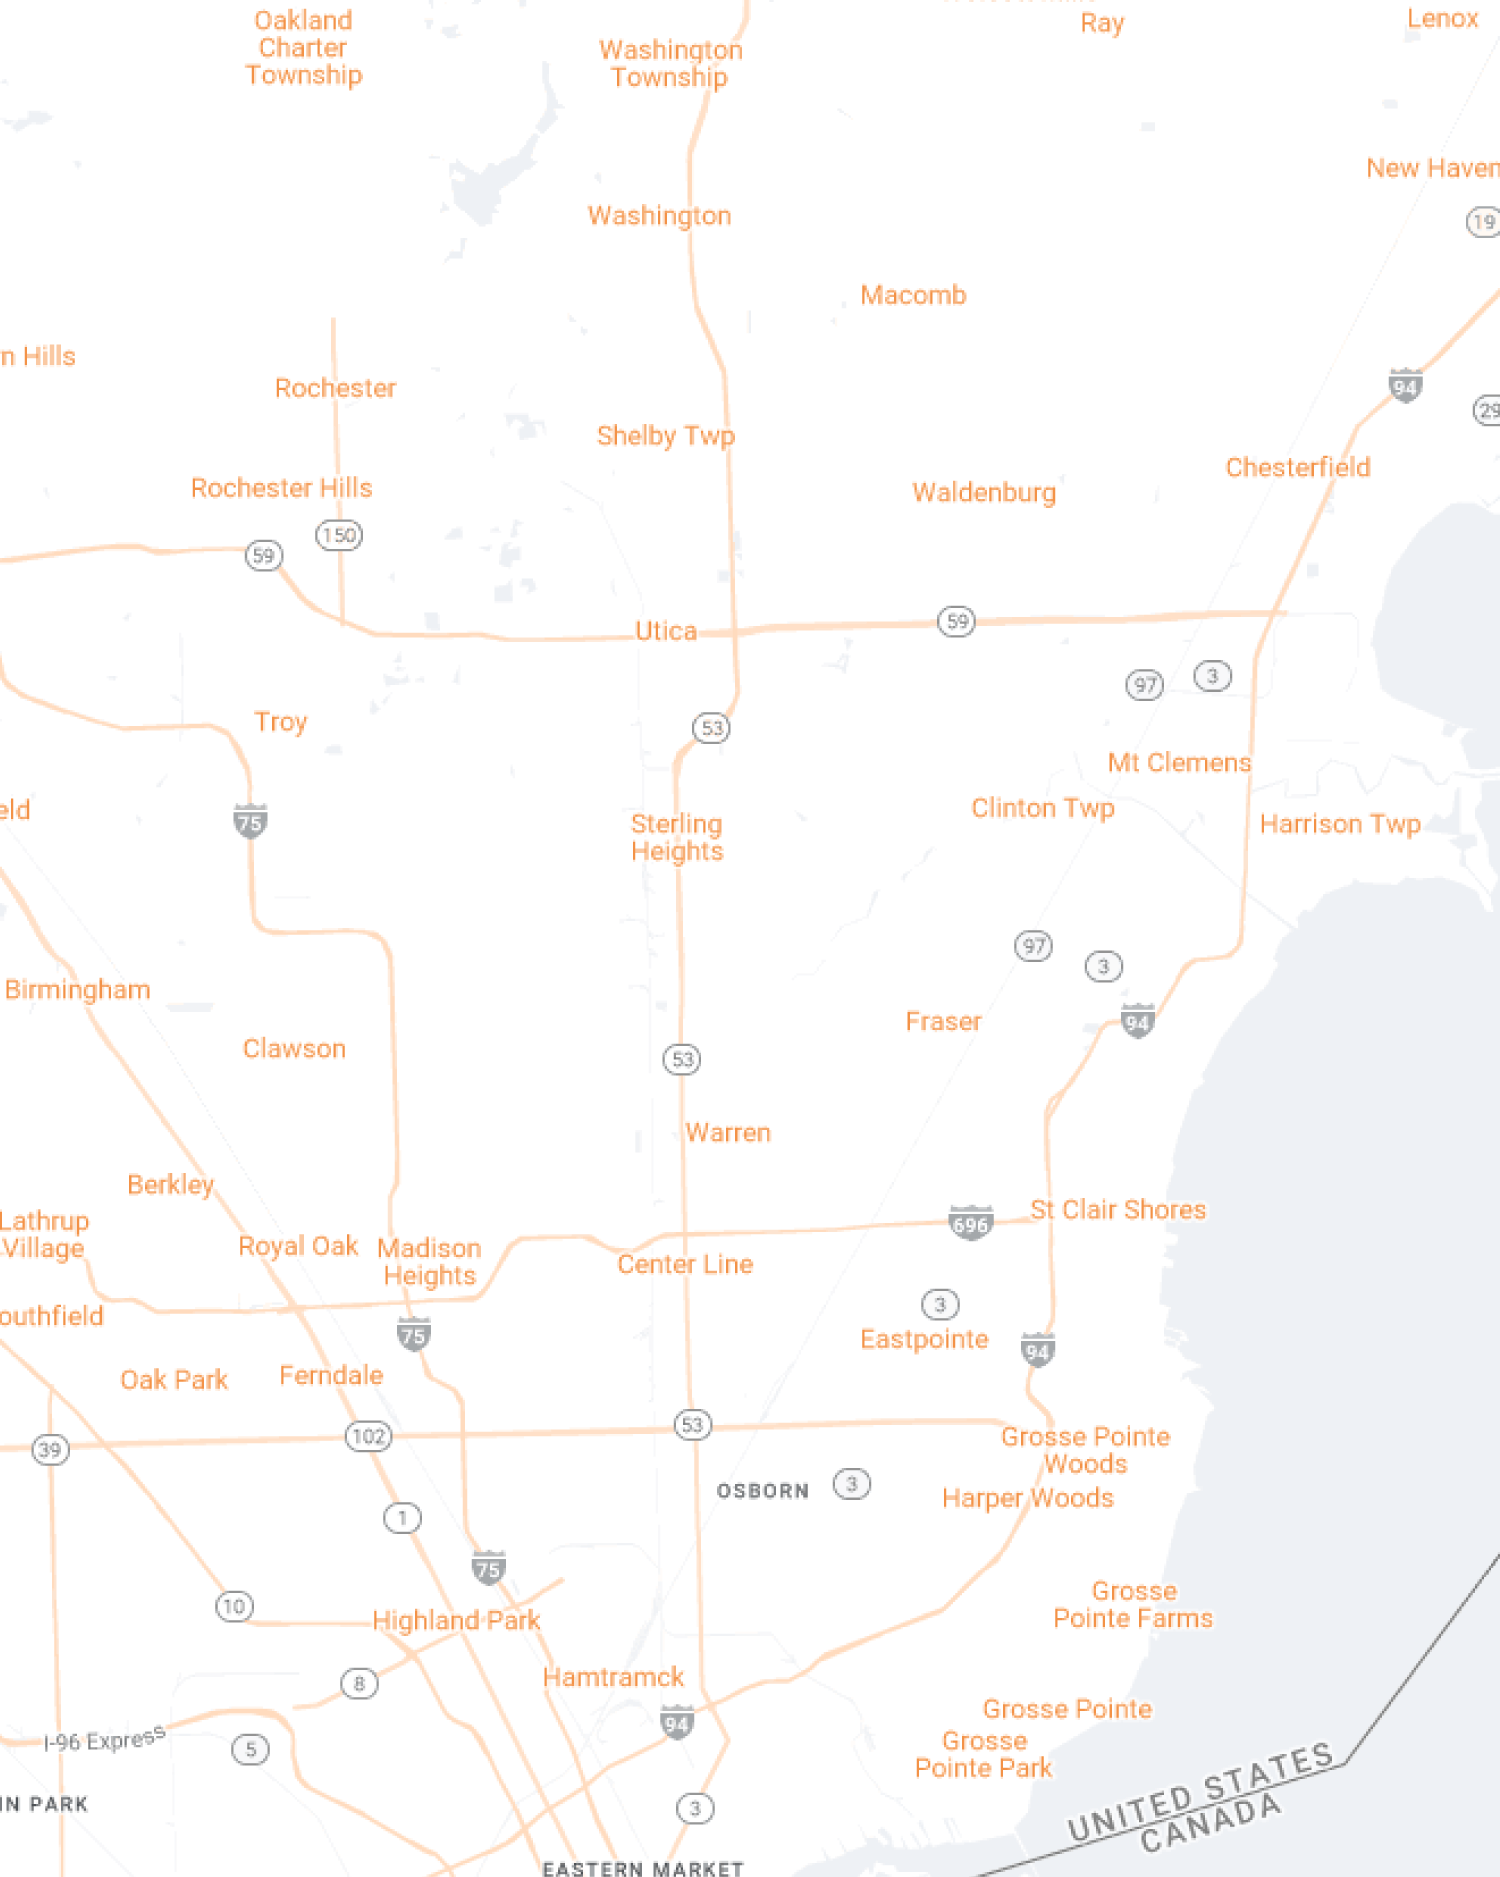 Oakland and Macomb mobile map view